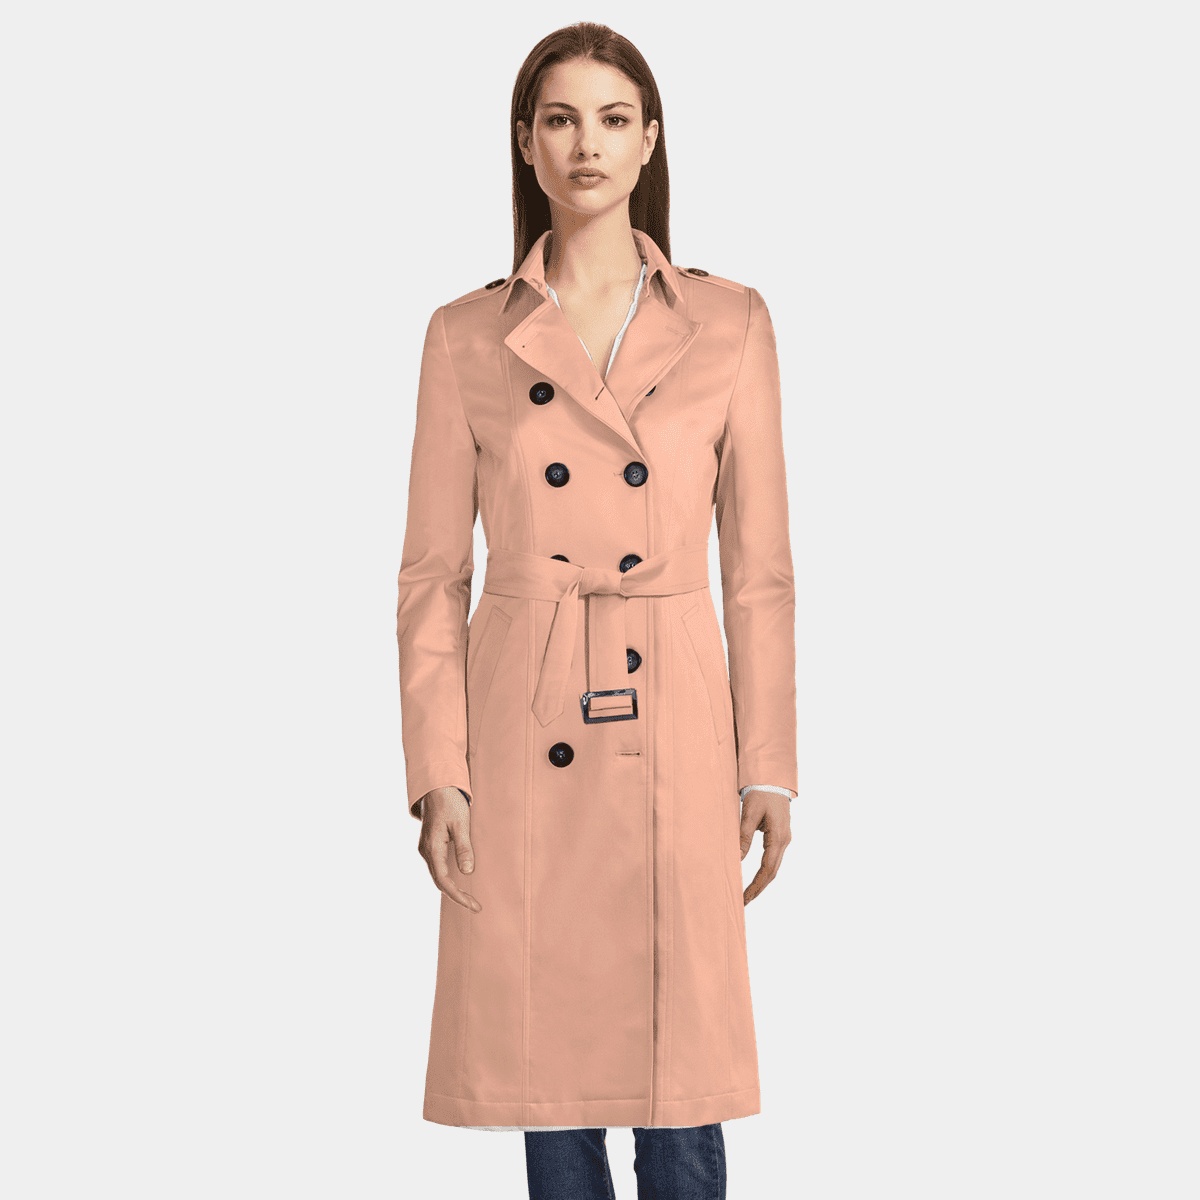 Women's Trench Coats  Tailor Made Trench Coats - Sumissura